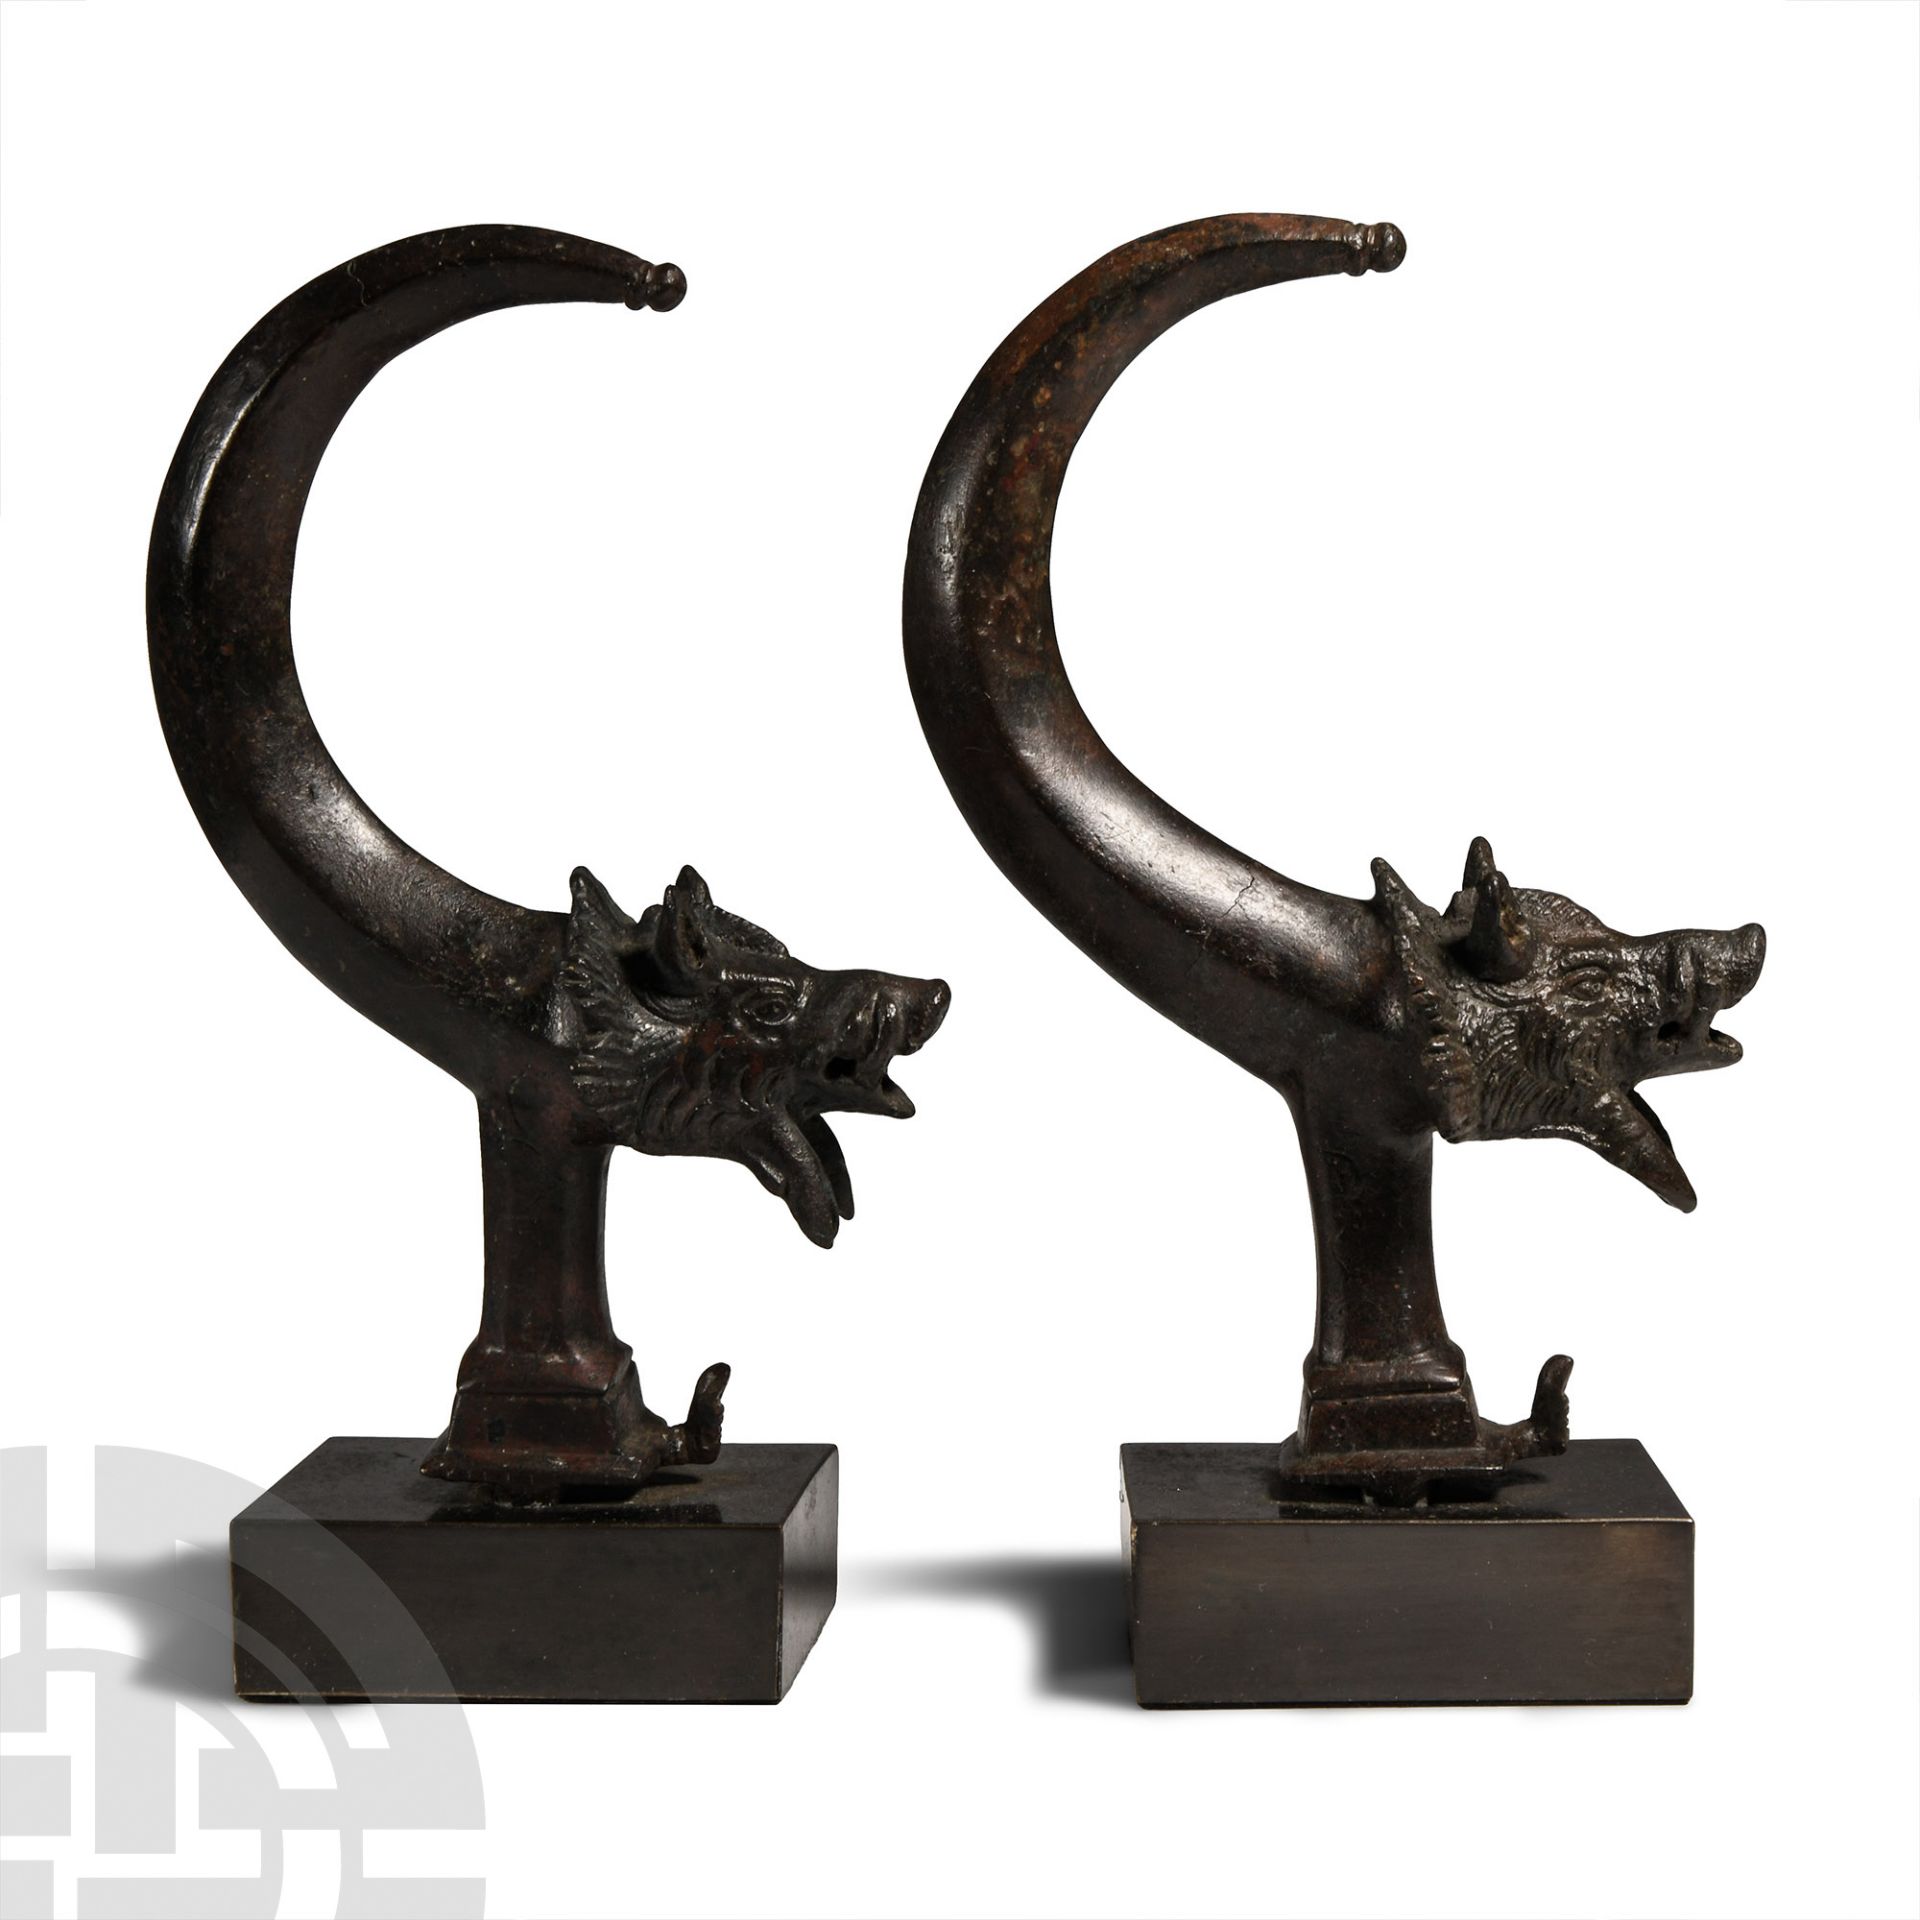 Roman Bronze Wild Boar Chariot Fitting Pair - Image 2 of 3